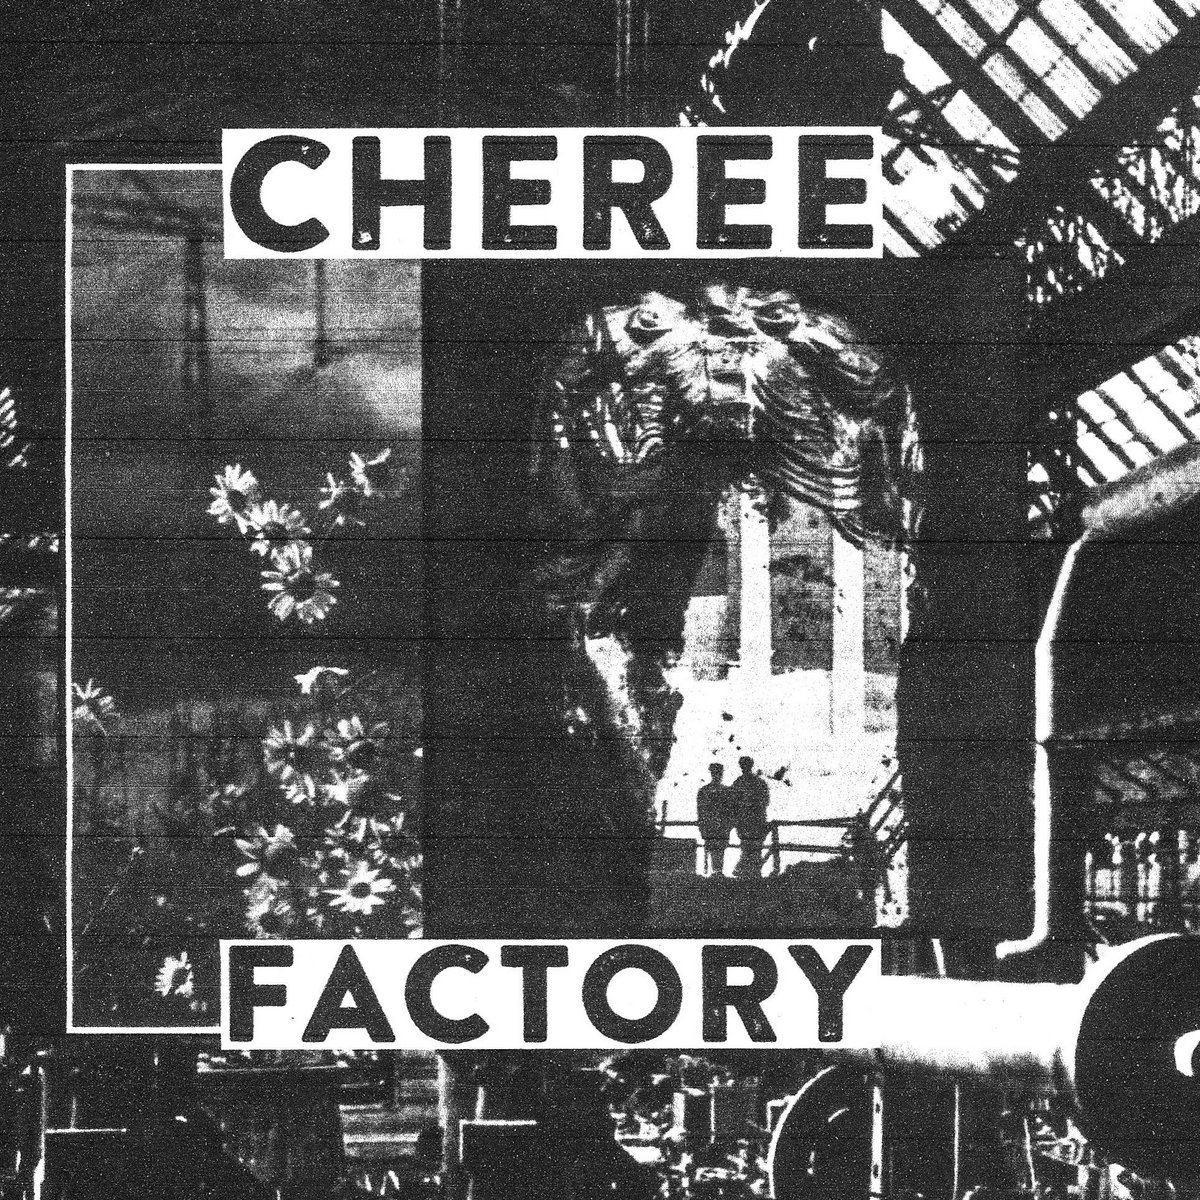 “Factory “of Noise – Cheree great debut EP